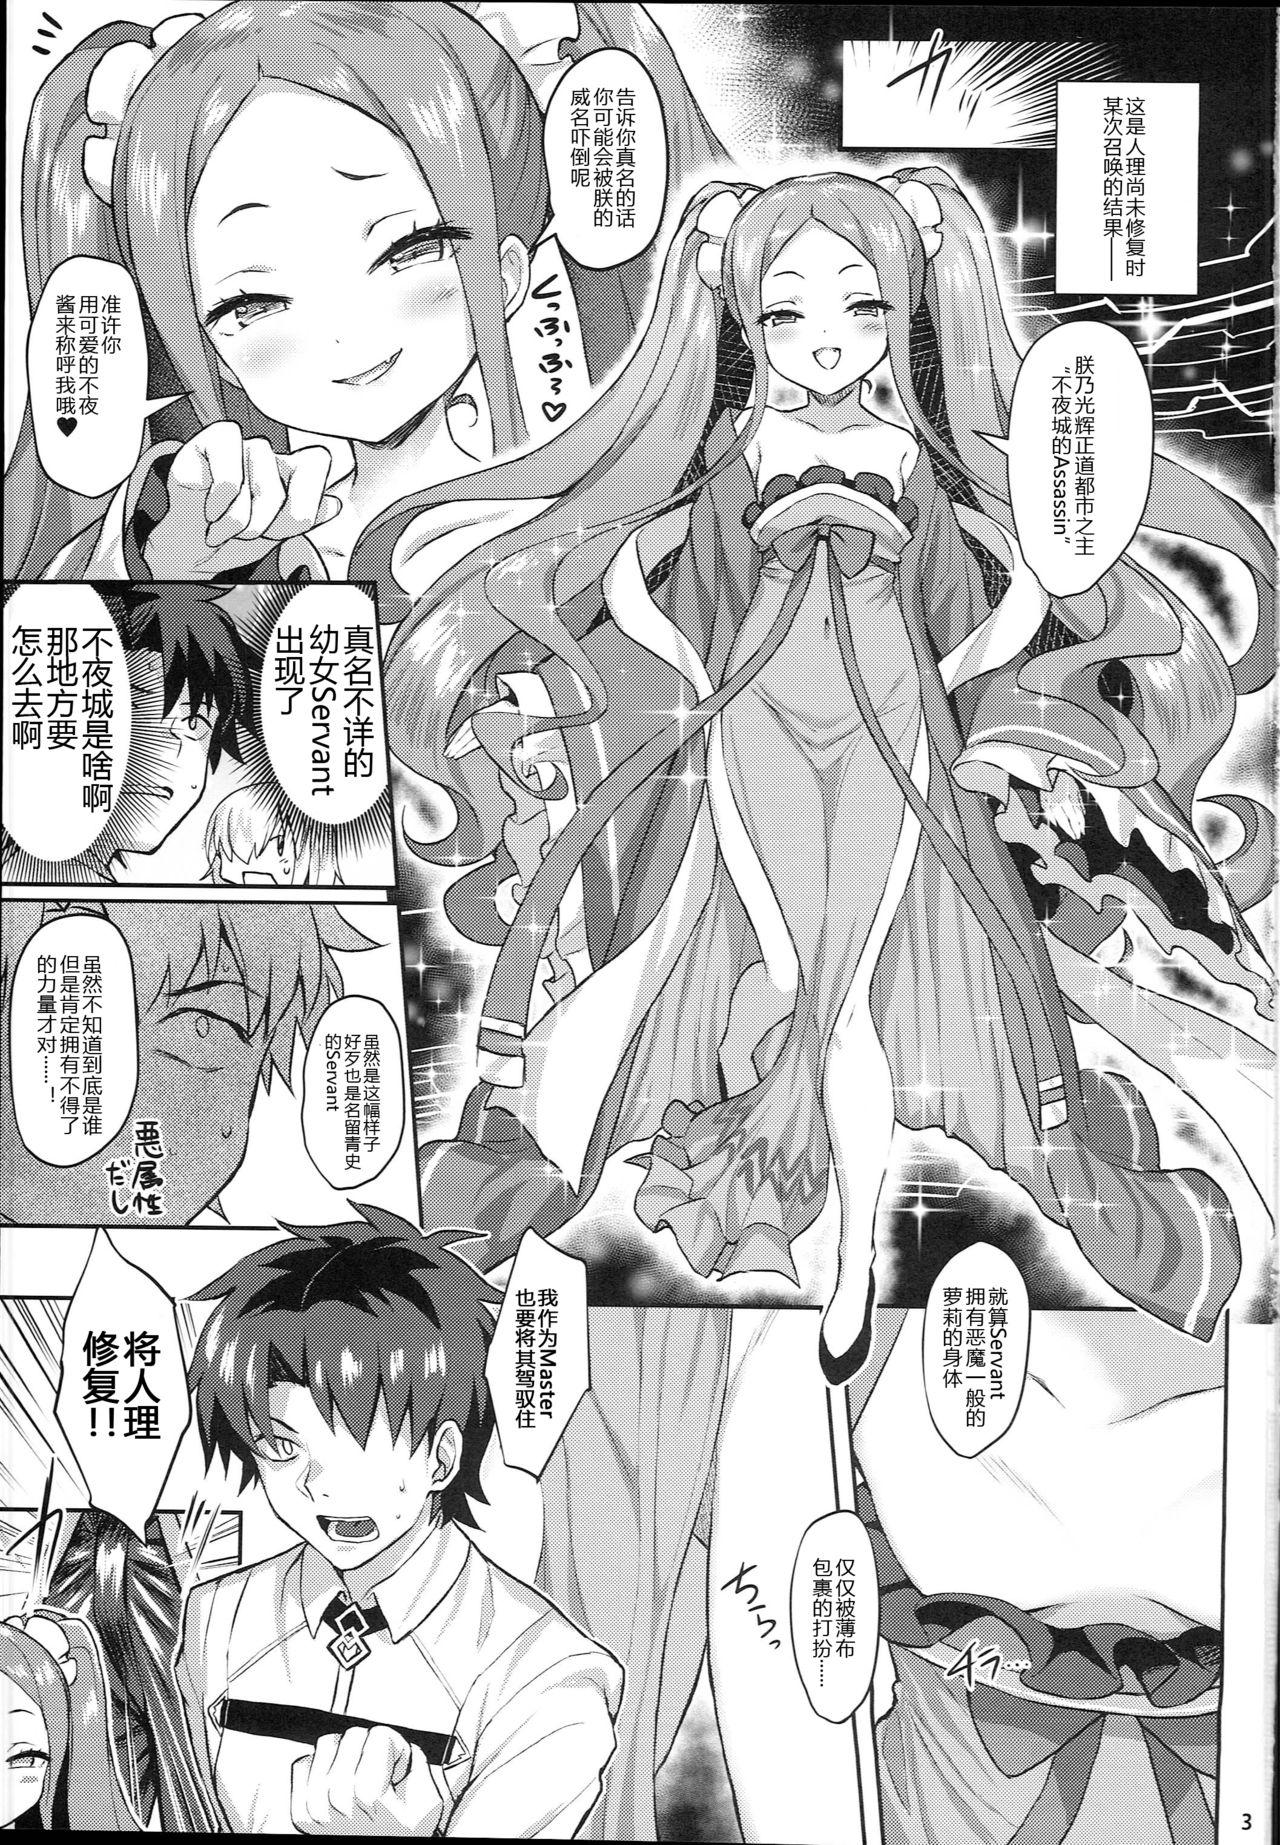 Gay Skinny Fuya Syndrome - Sleepless Syndrome - Fate grand order Foot Job - Page 4